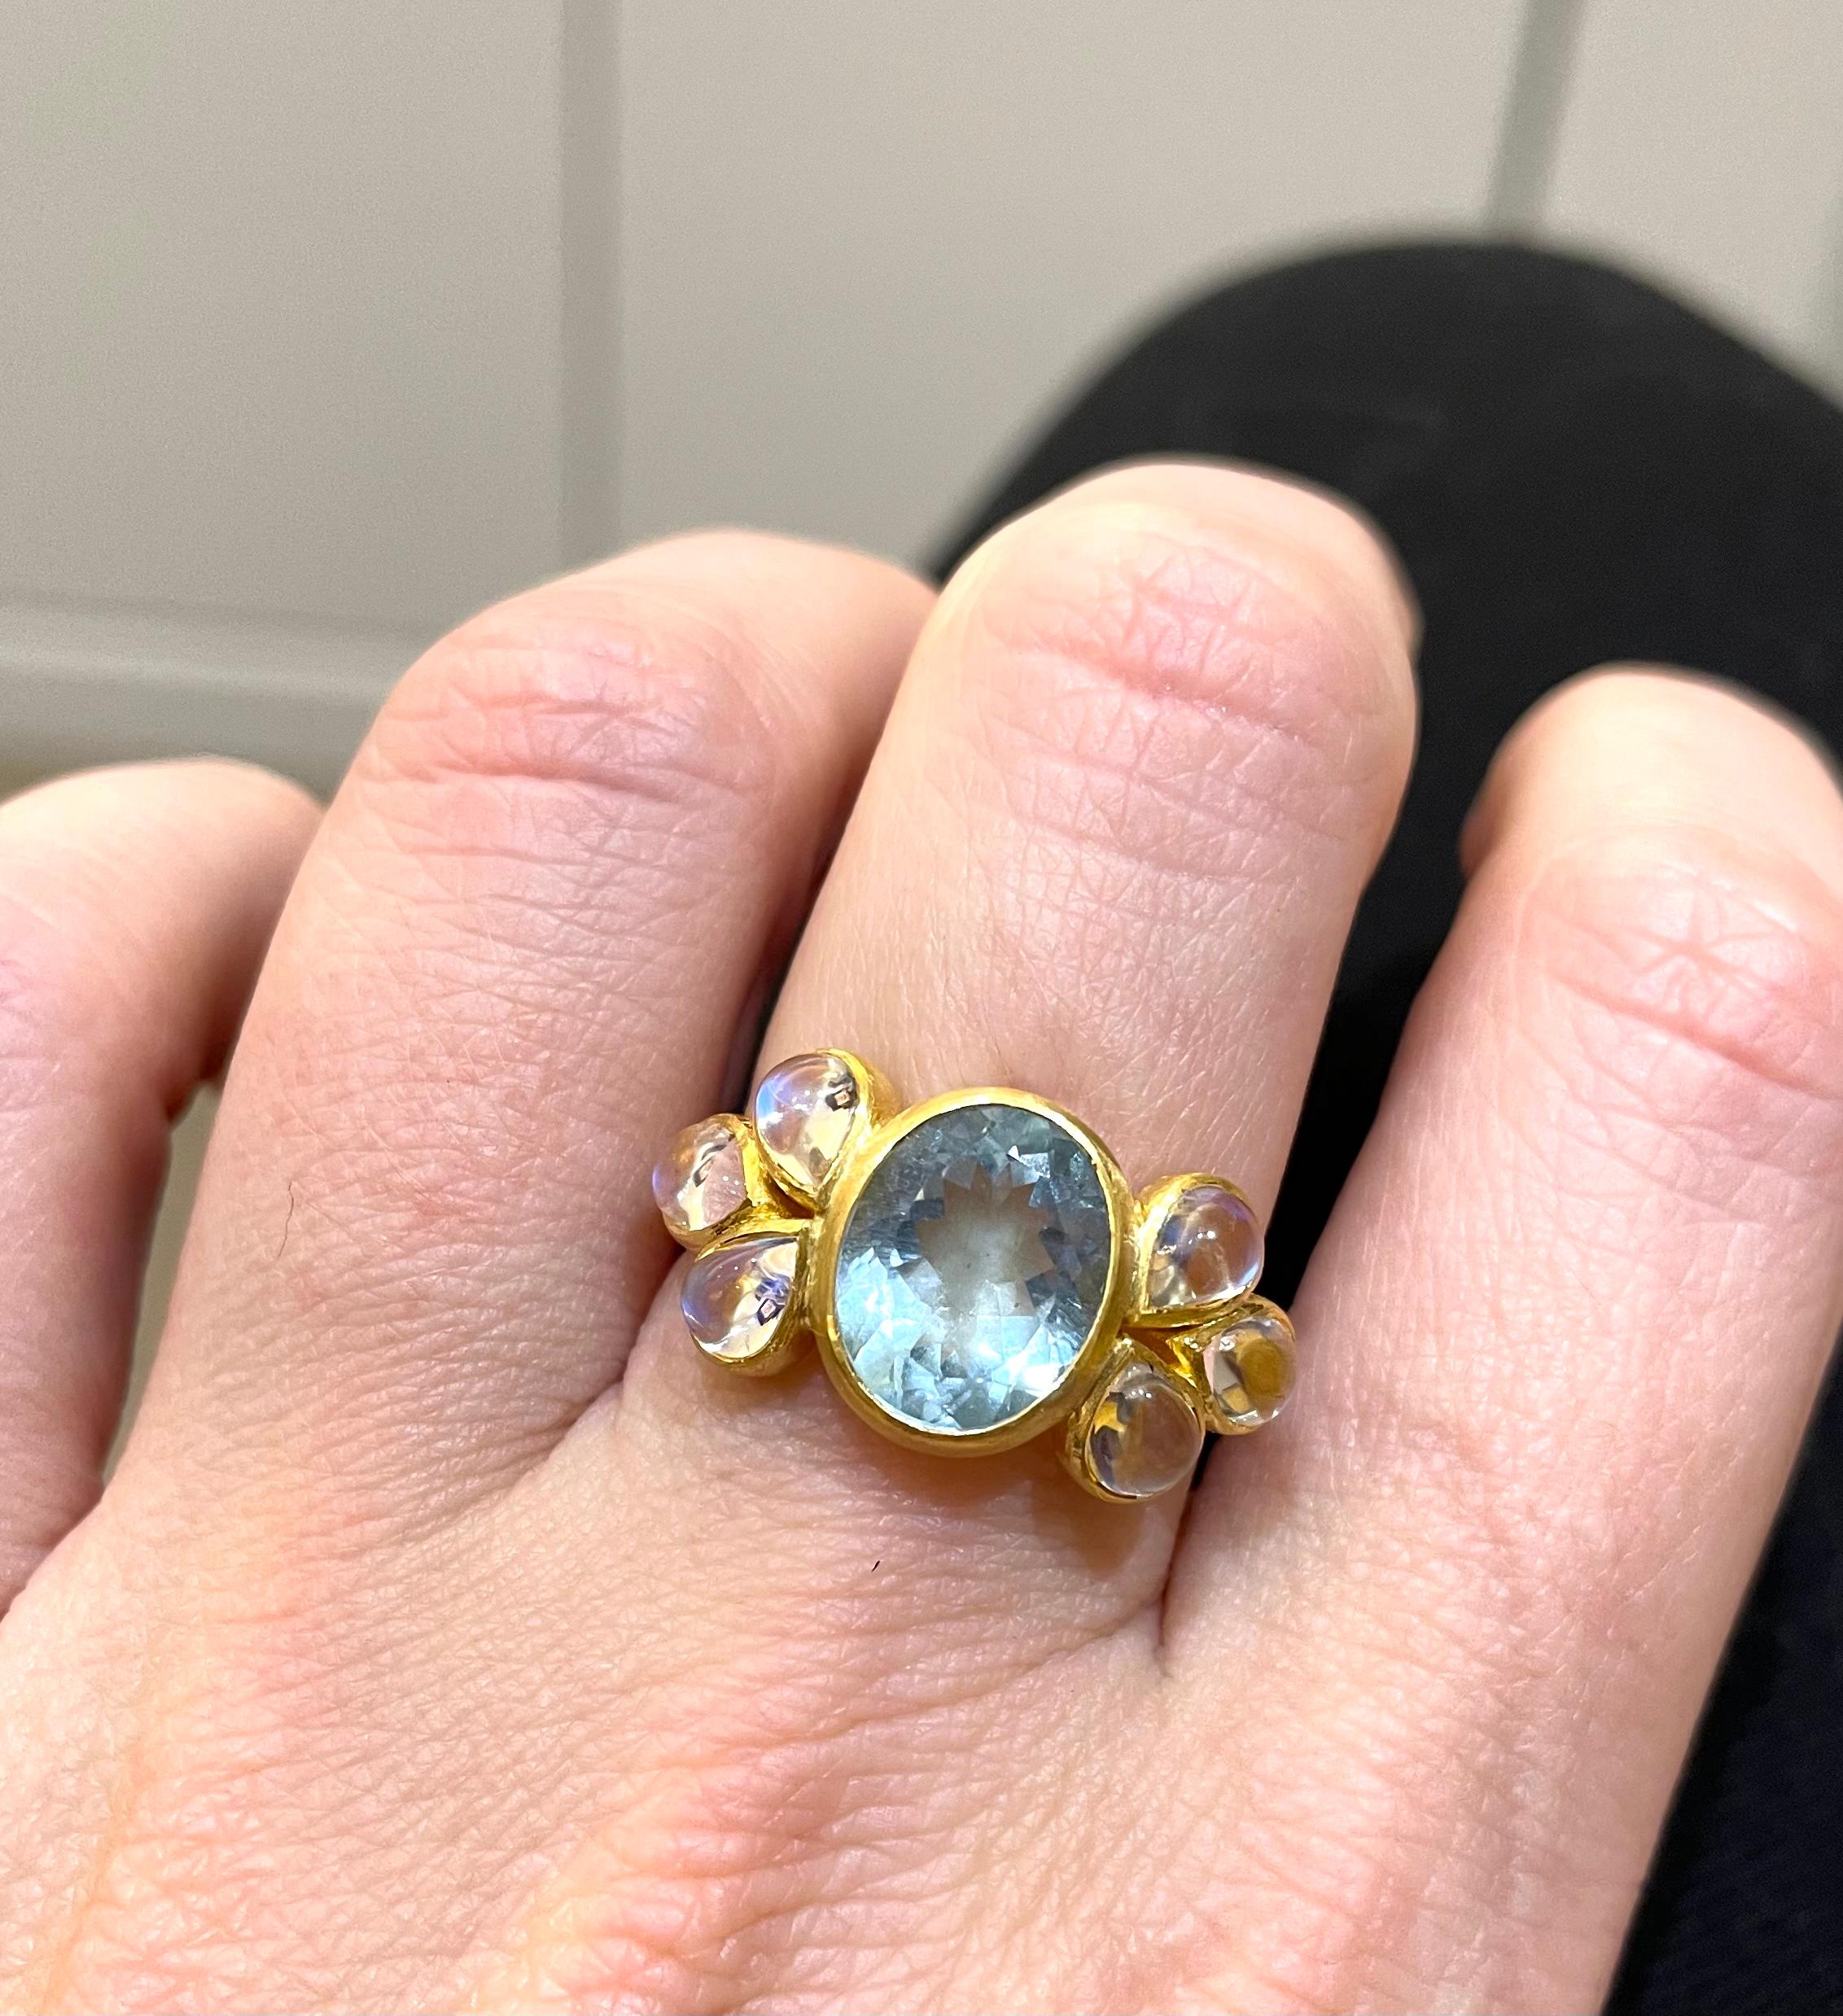 Contemporary Scrives 2.86 Ct Aquamarine 6 Moonstone Cabochon 22 Karat Gold Cocktail Ring For Sale